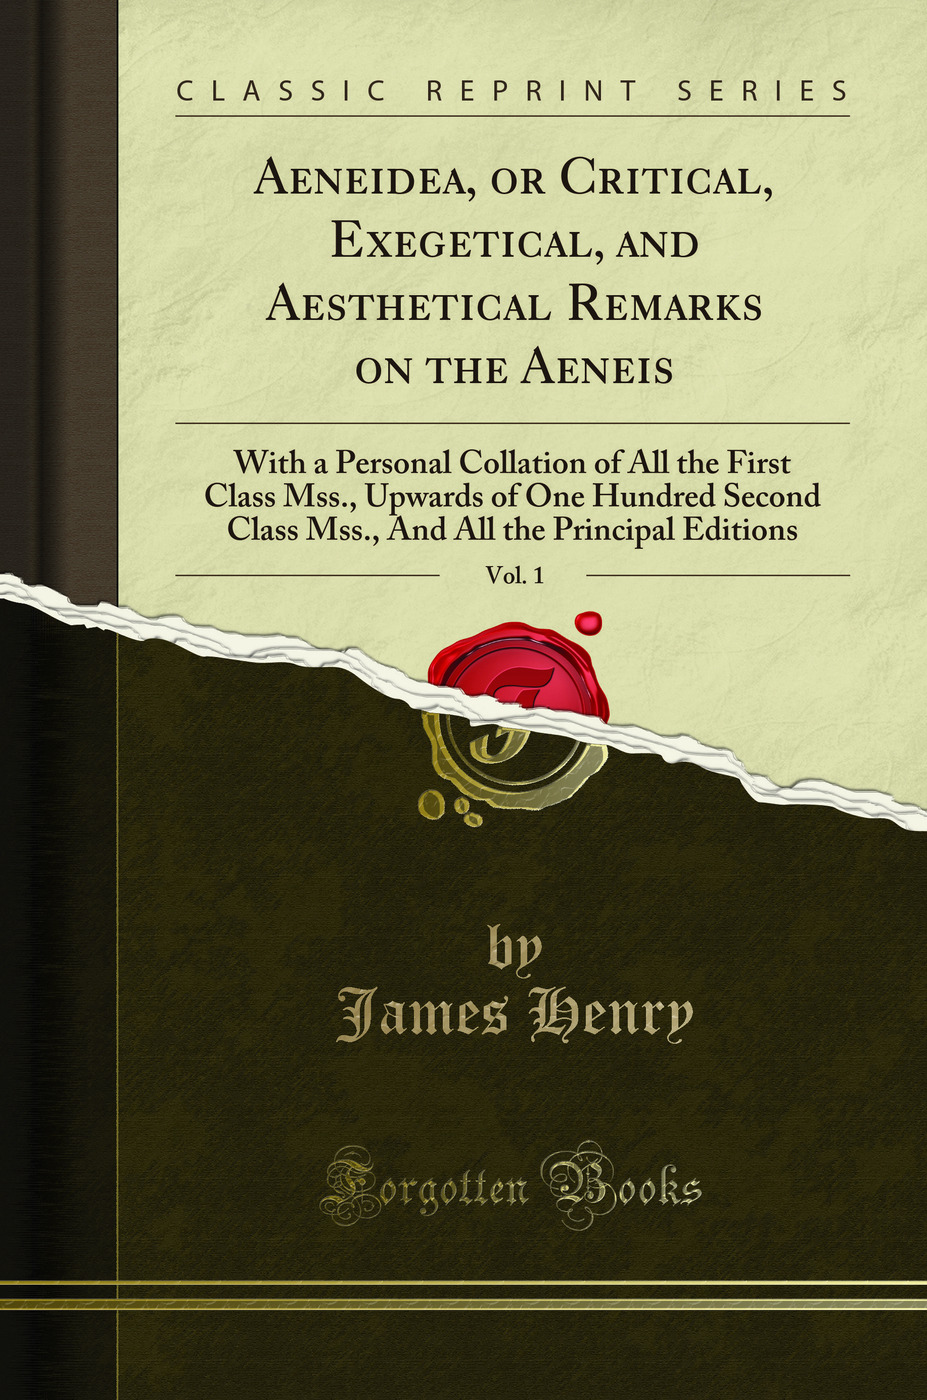 Aeneidea, or Critical, Exegetical, and Aesthetical Remarks on the Aeneis, Vol. - James Henry